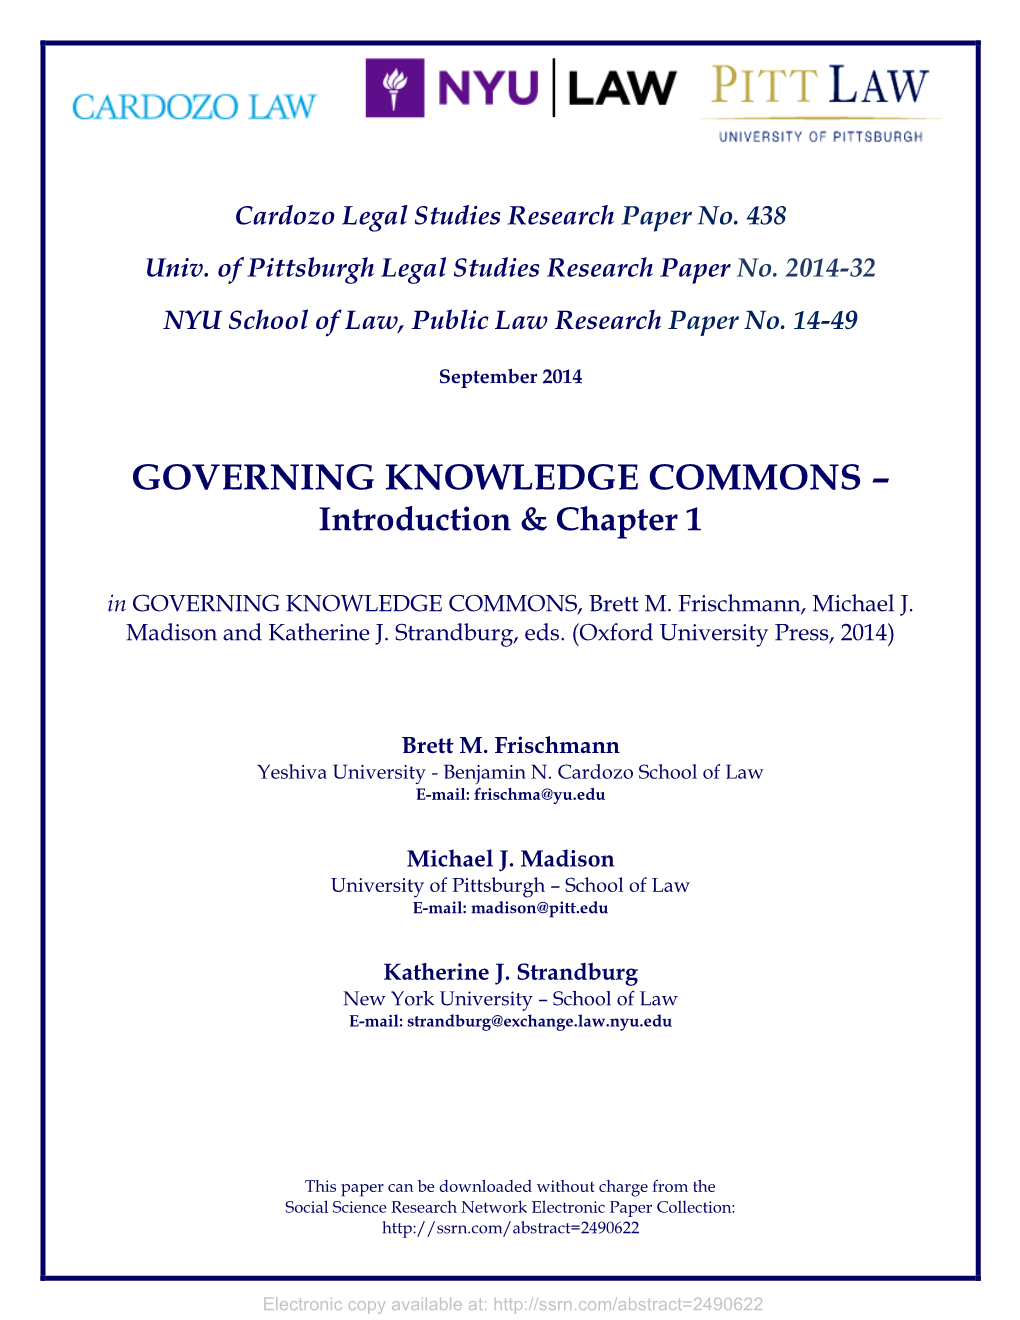 GOVERNING KNOWLEDGE COMMONS – Introduction & Chapter 1